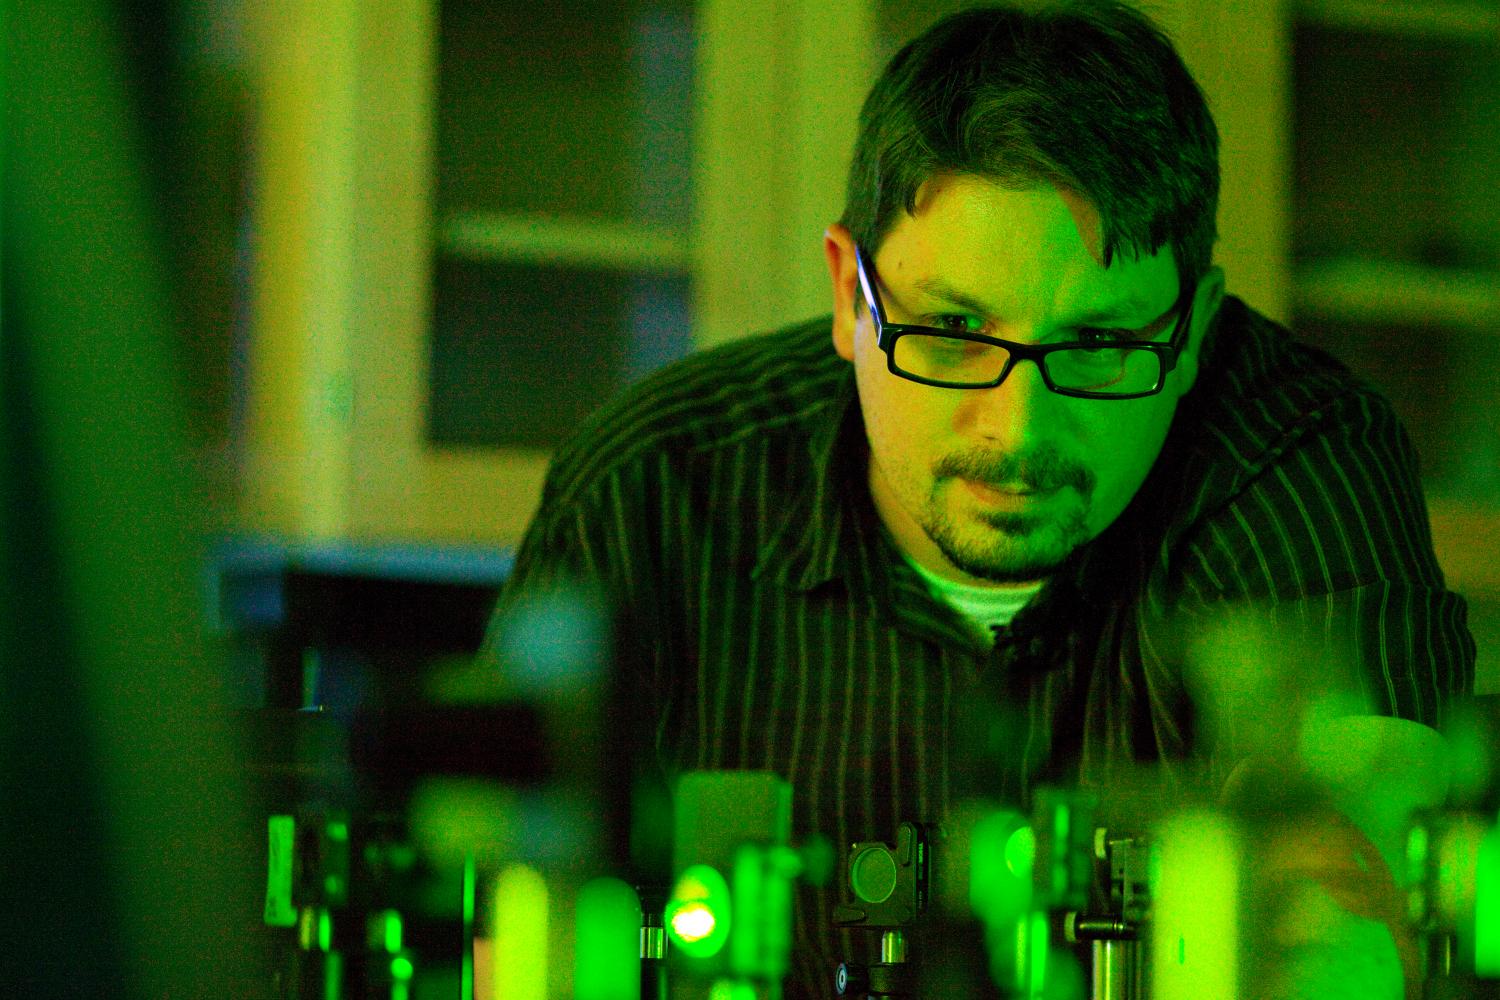 A male scientist wearing black glasses examines green, fiber optic lasers.